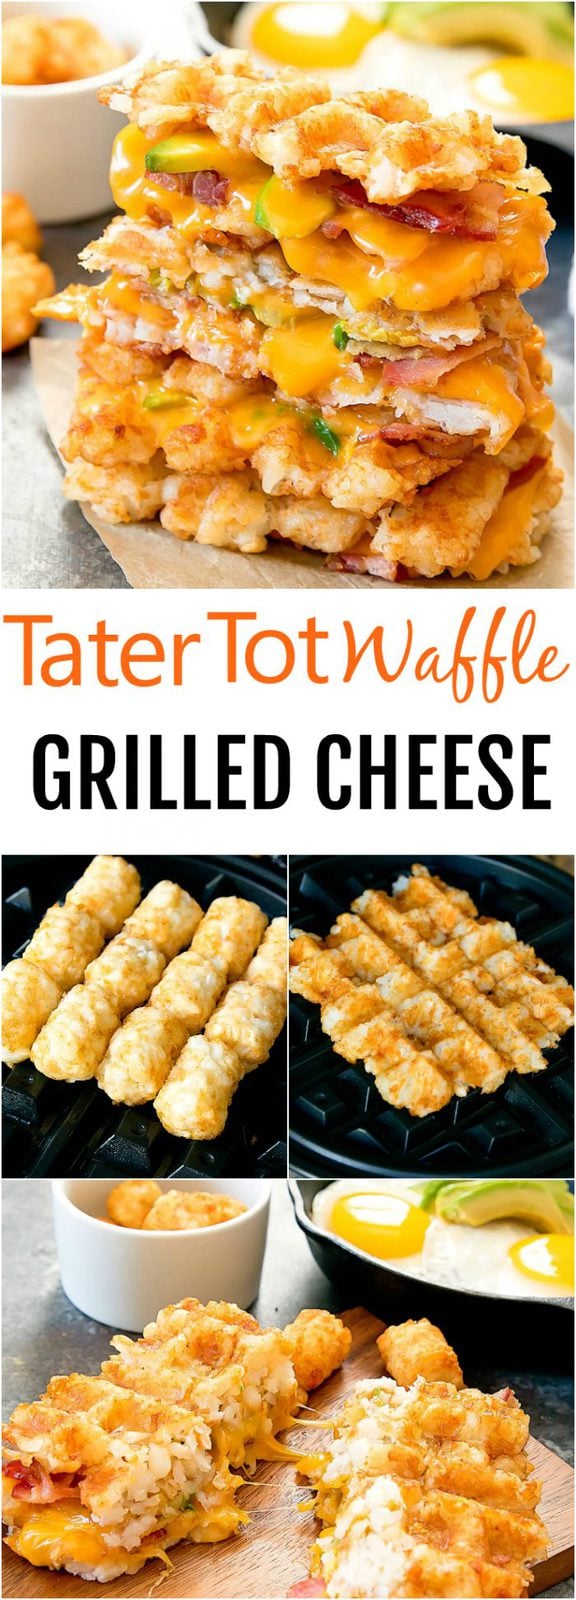 Tater Tot Waffle Grilled Cheese